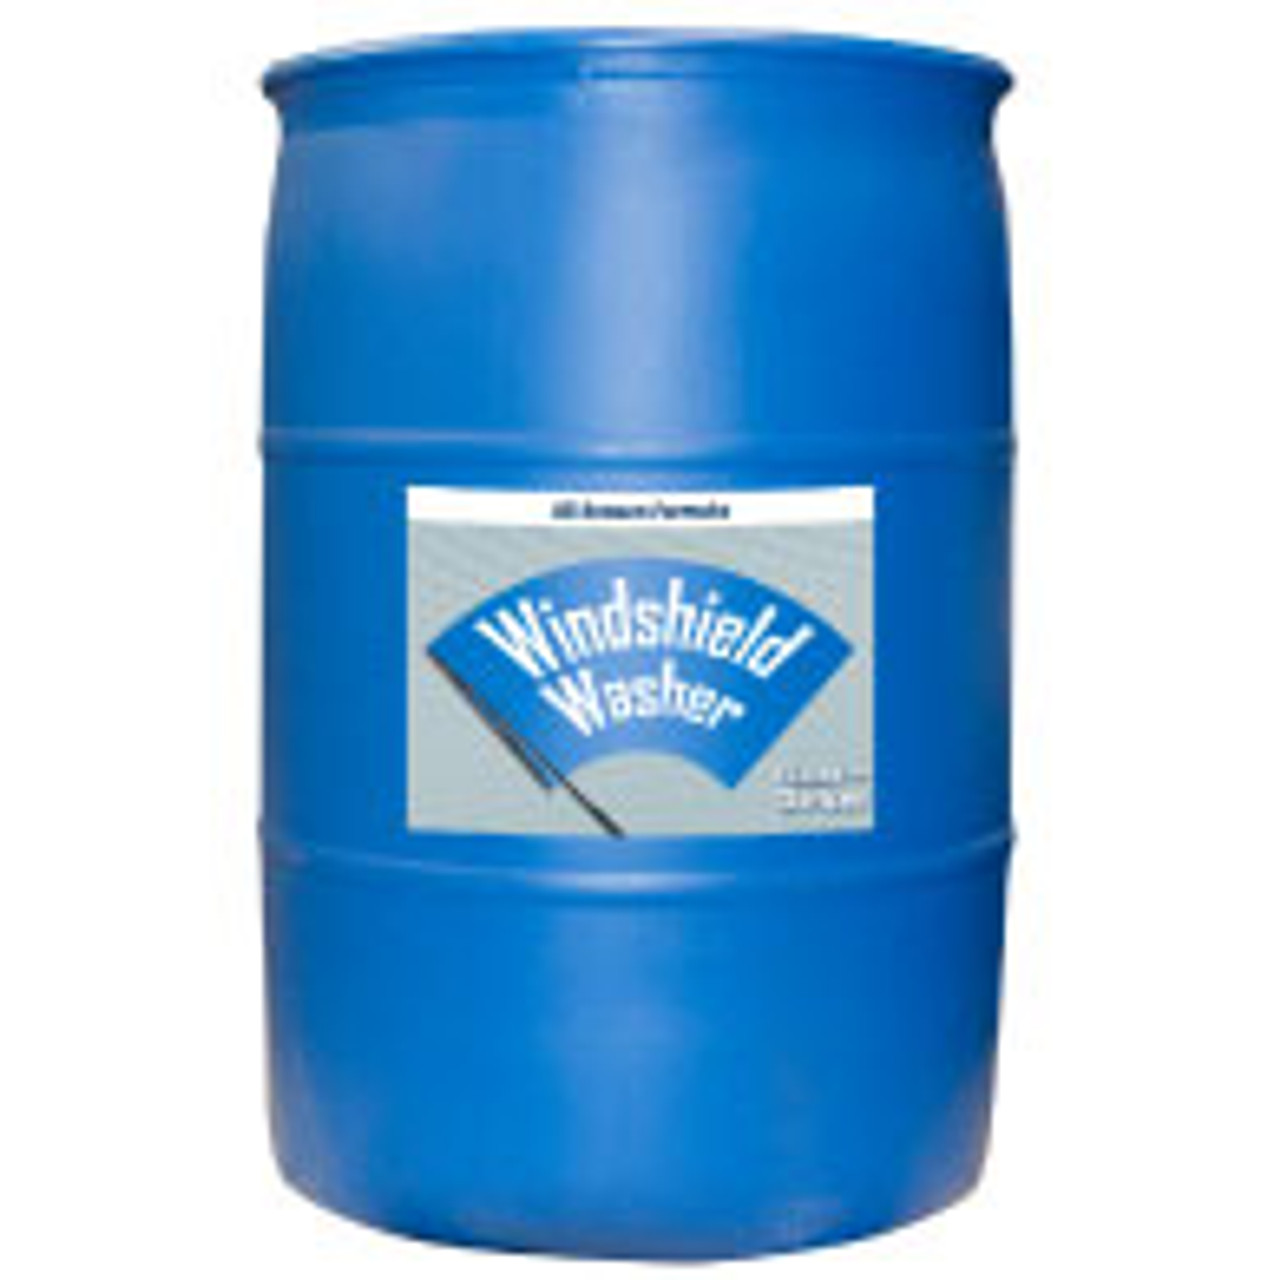 Windshield Washer Fluid 72% Concentrate -45F